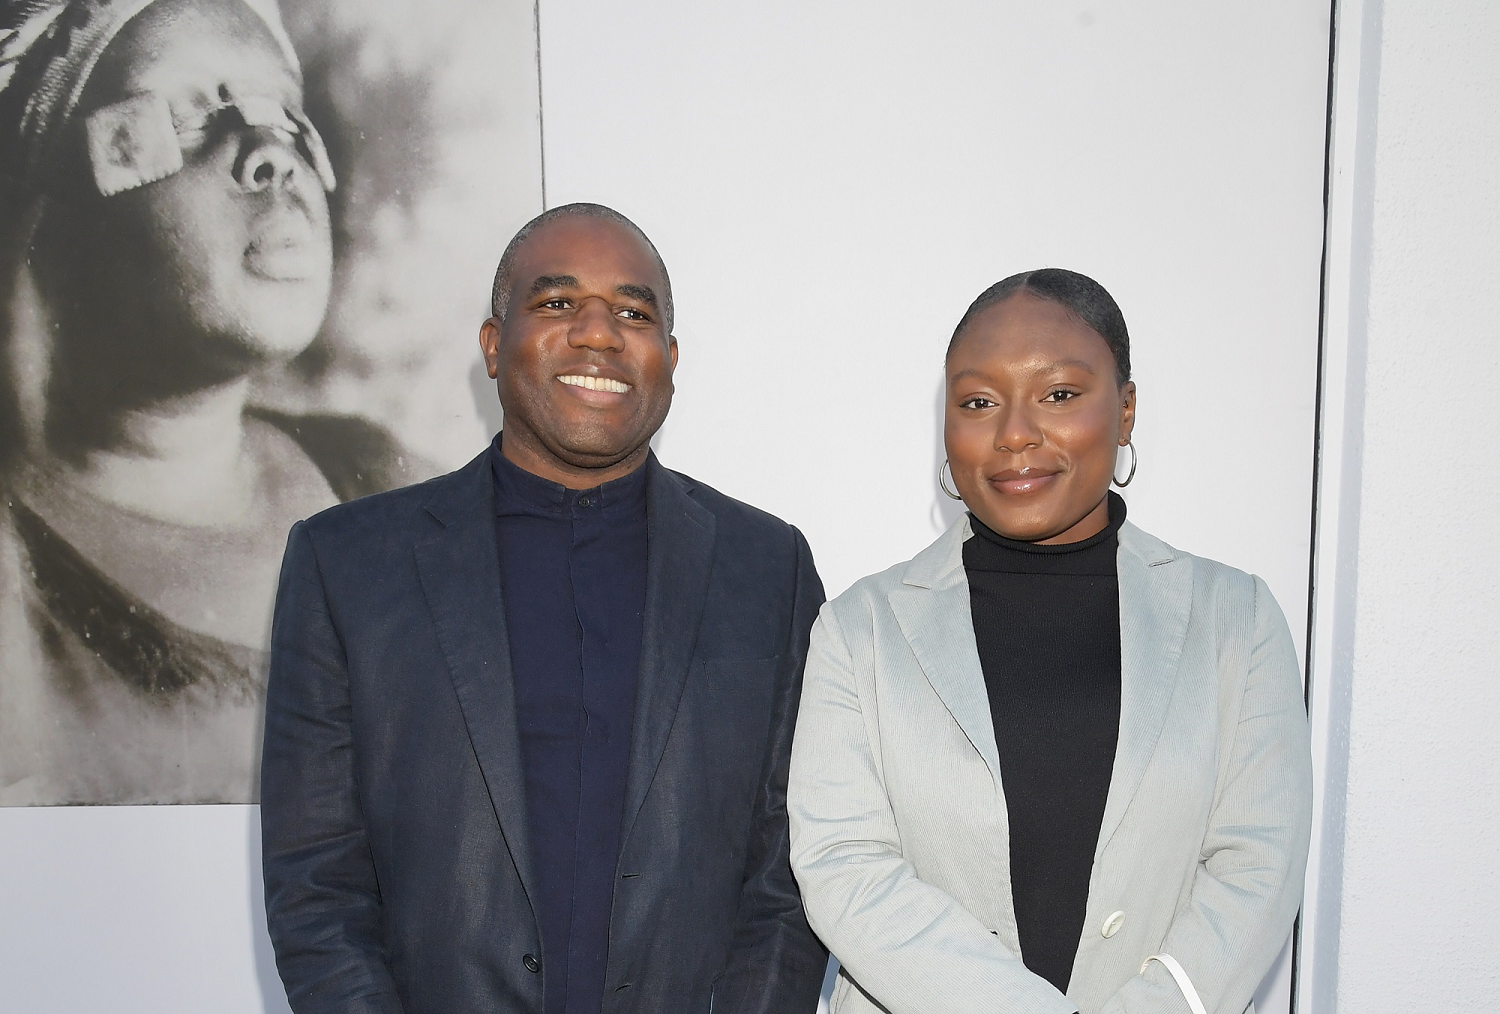 David Lammy MP and IntoUniversity student Lady Tettey at the unveiling of 'Breath is Invisible', launching with an installation of works by Grenfell artist Khadija Saye in Notting Hill